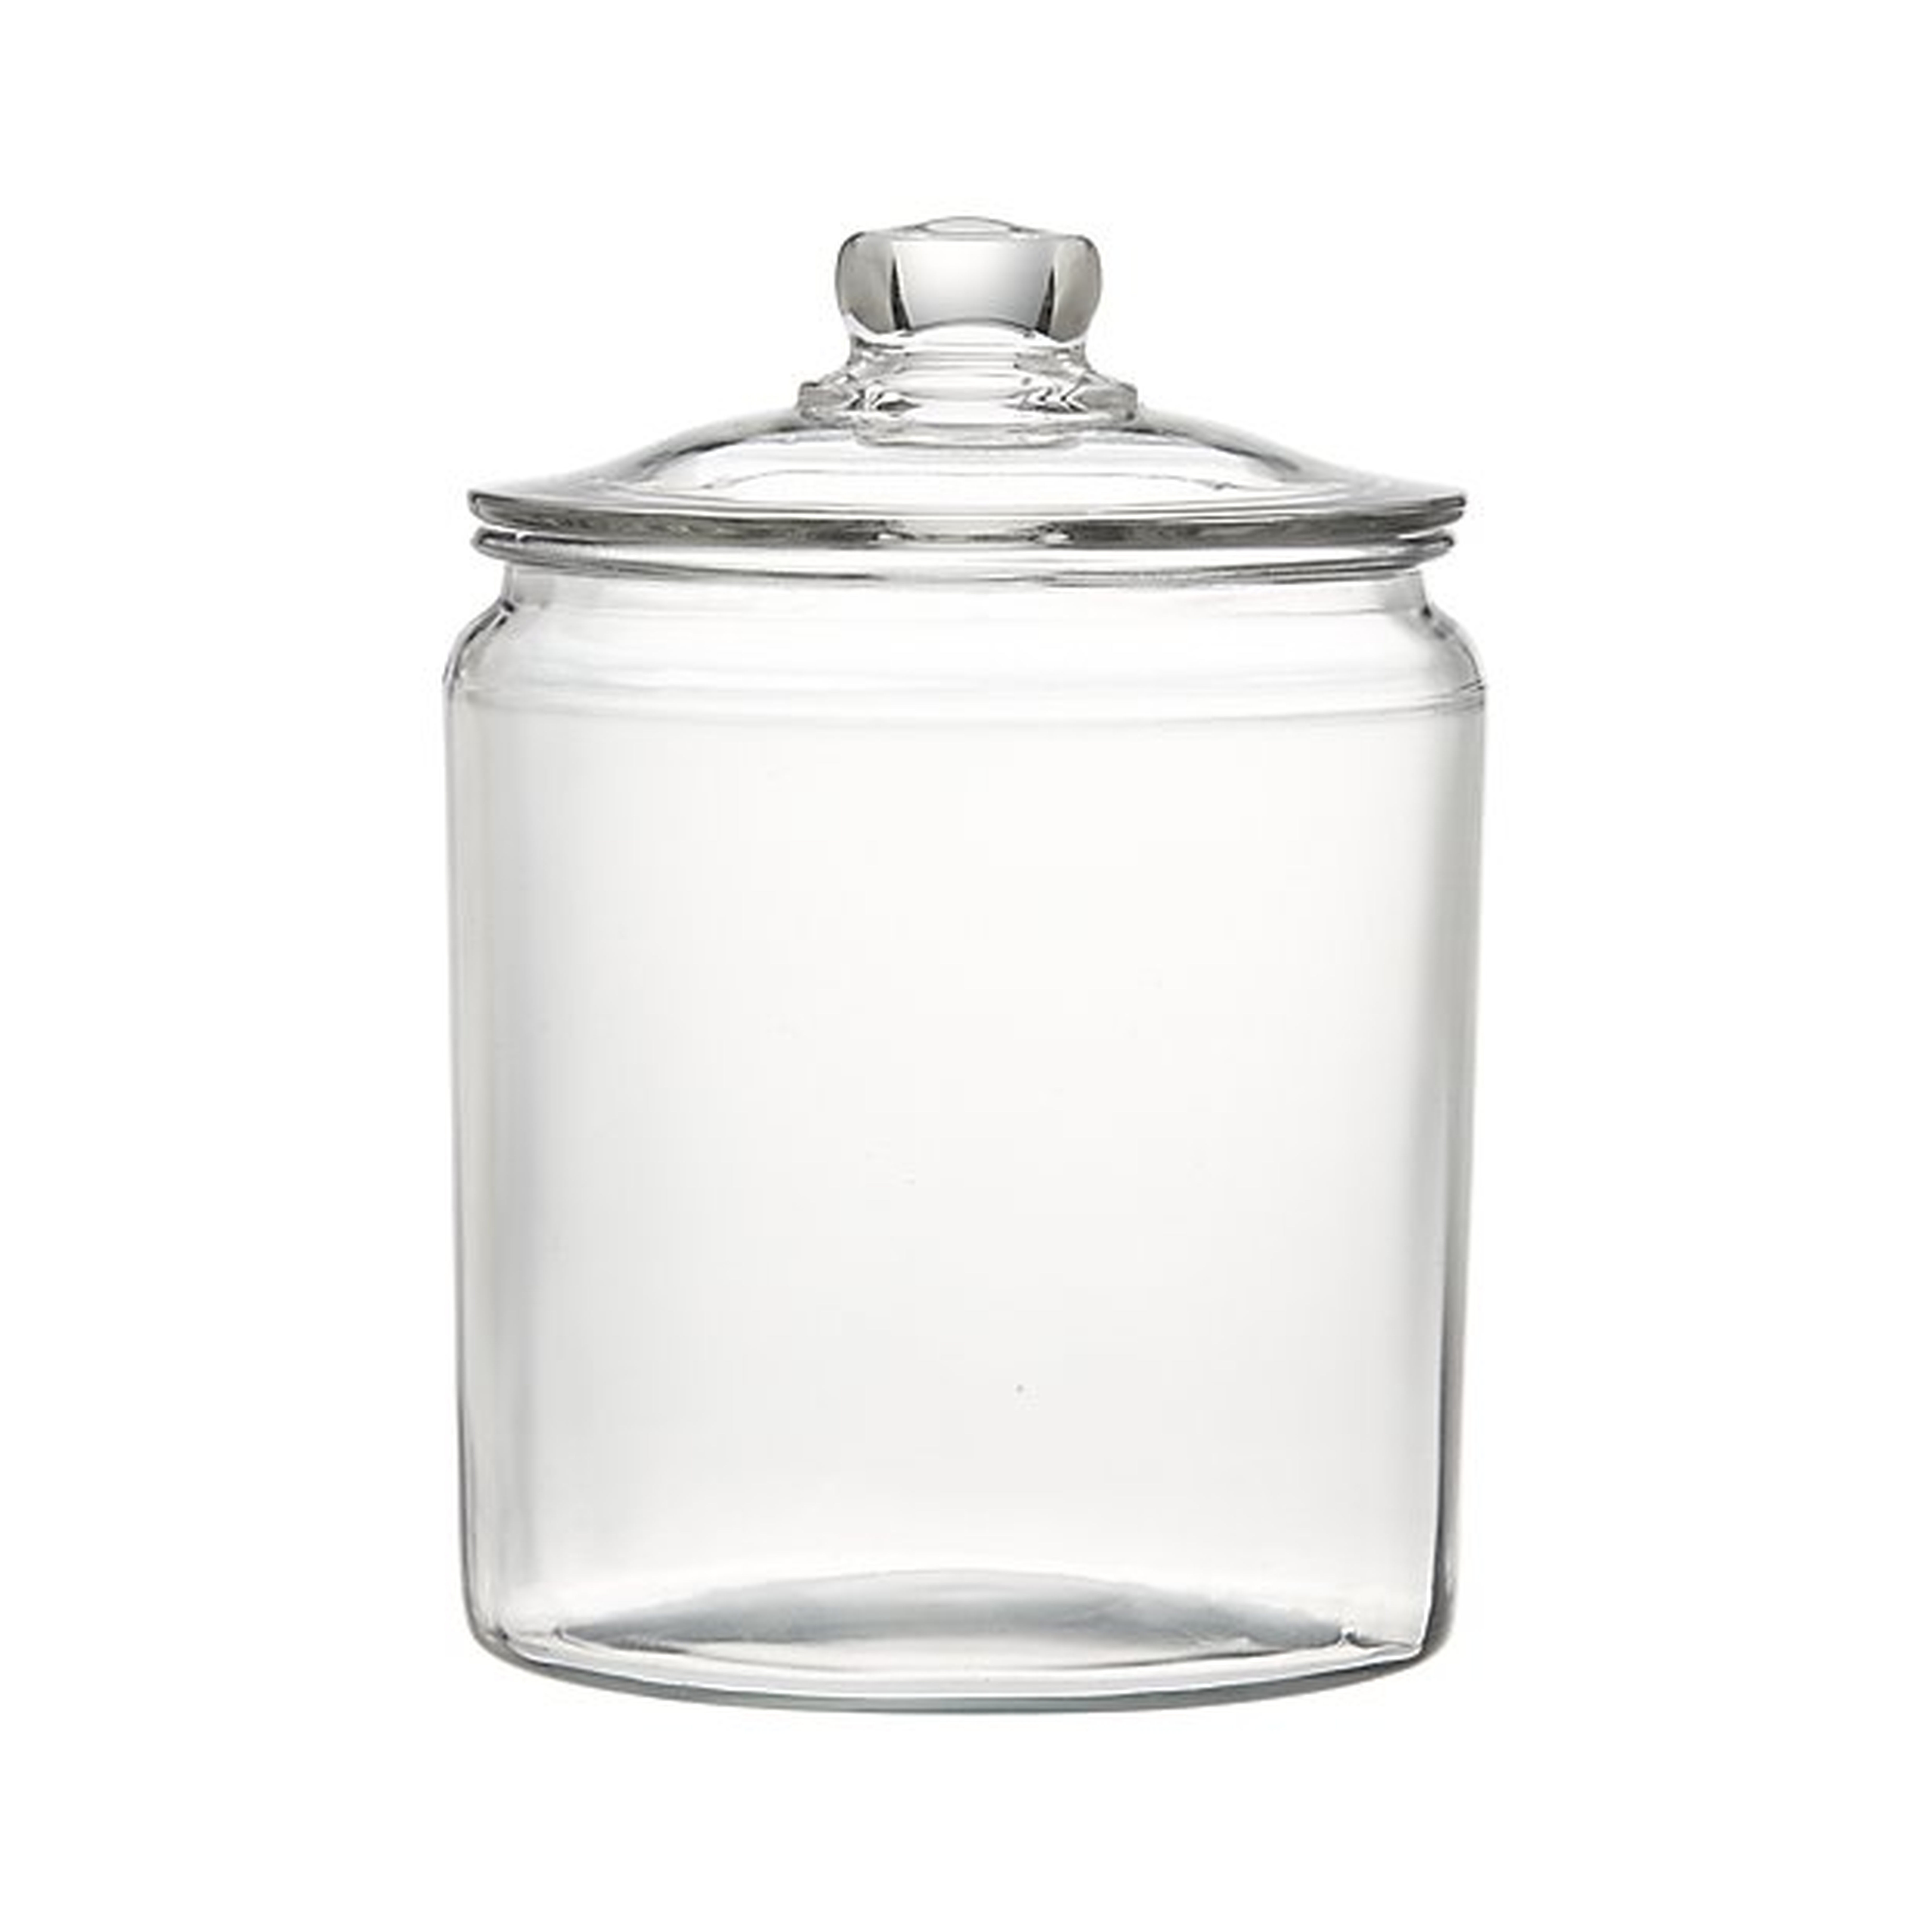 Heritage Hill 64 oz. Glass Jar with Lid - Crate and Barrel